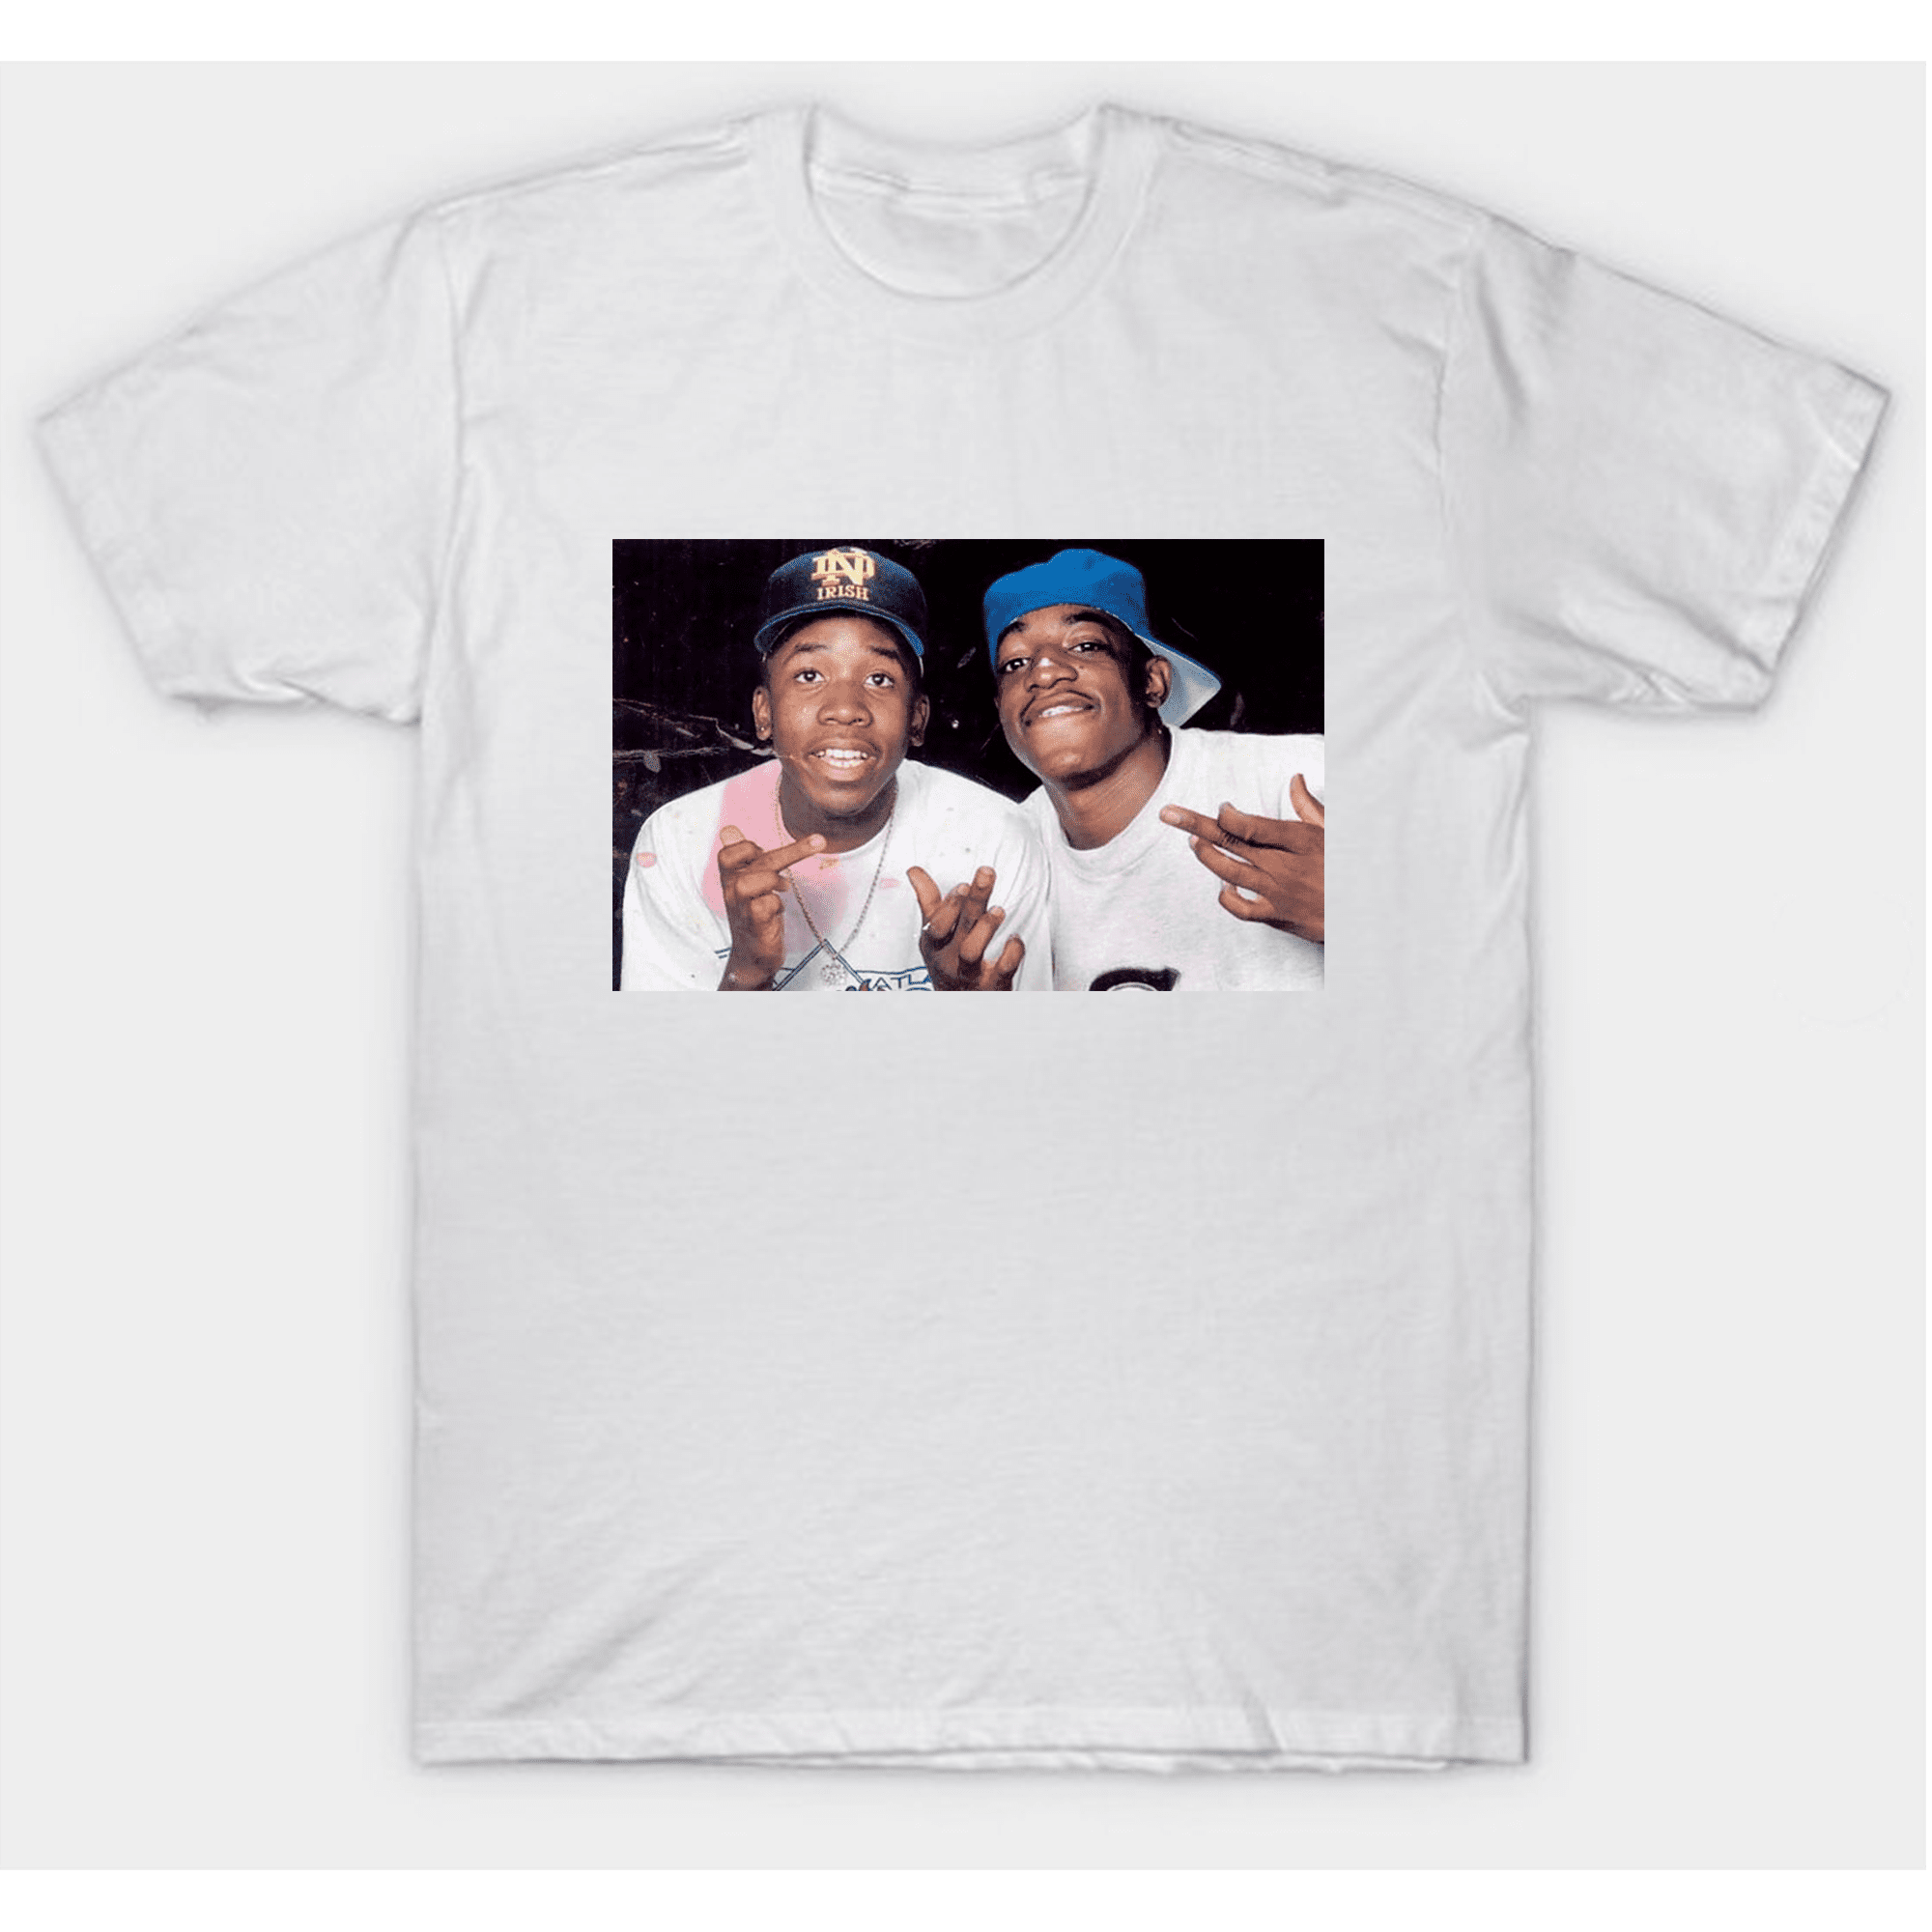 Big Boi And Andre 3000 Of Outkast T-shirt by clothenvy